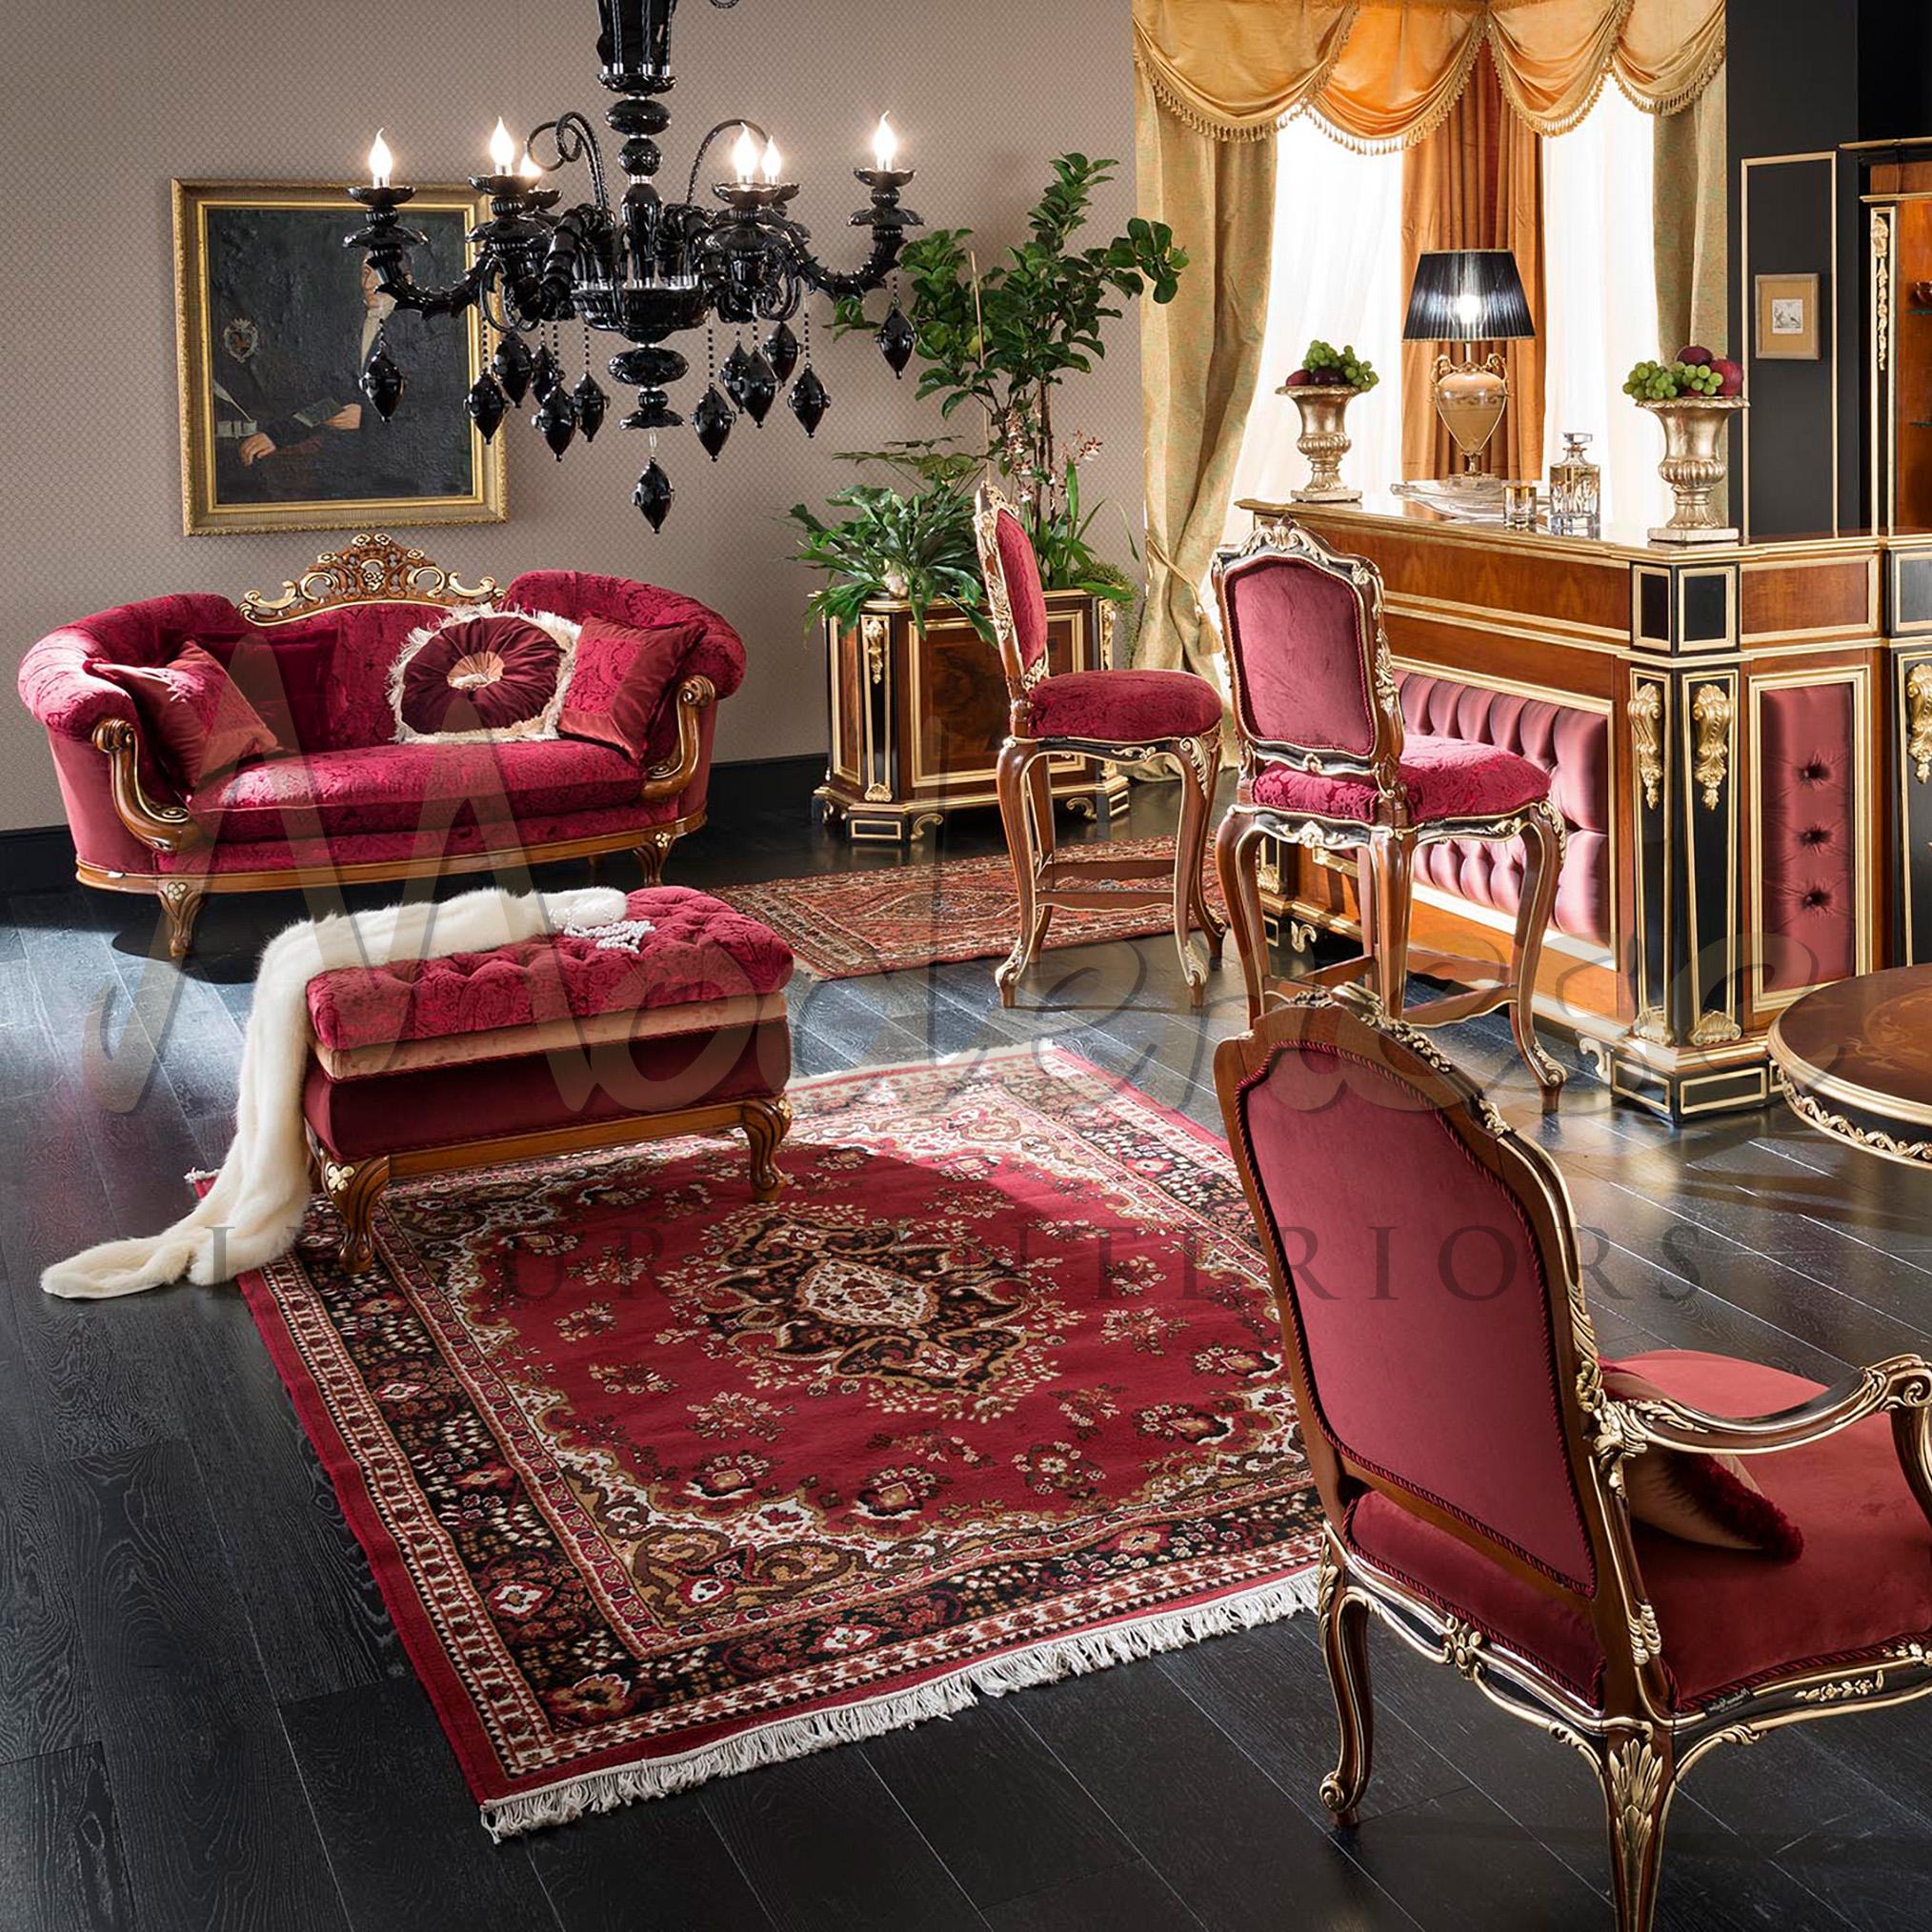 If you want to create the red passsion mood and tone, look no further than this lover seat sofa. The selection of crimson Made in Italy fabric stands perfectly against the golden wood frame. Handcrafted wooden armrest and legs with the gilding gold